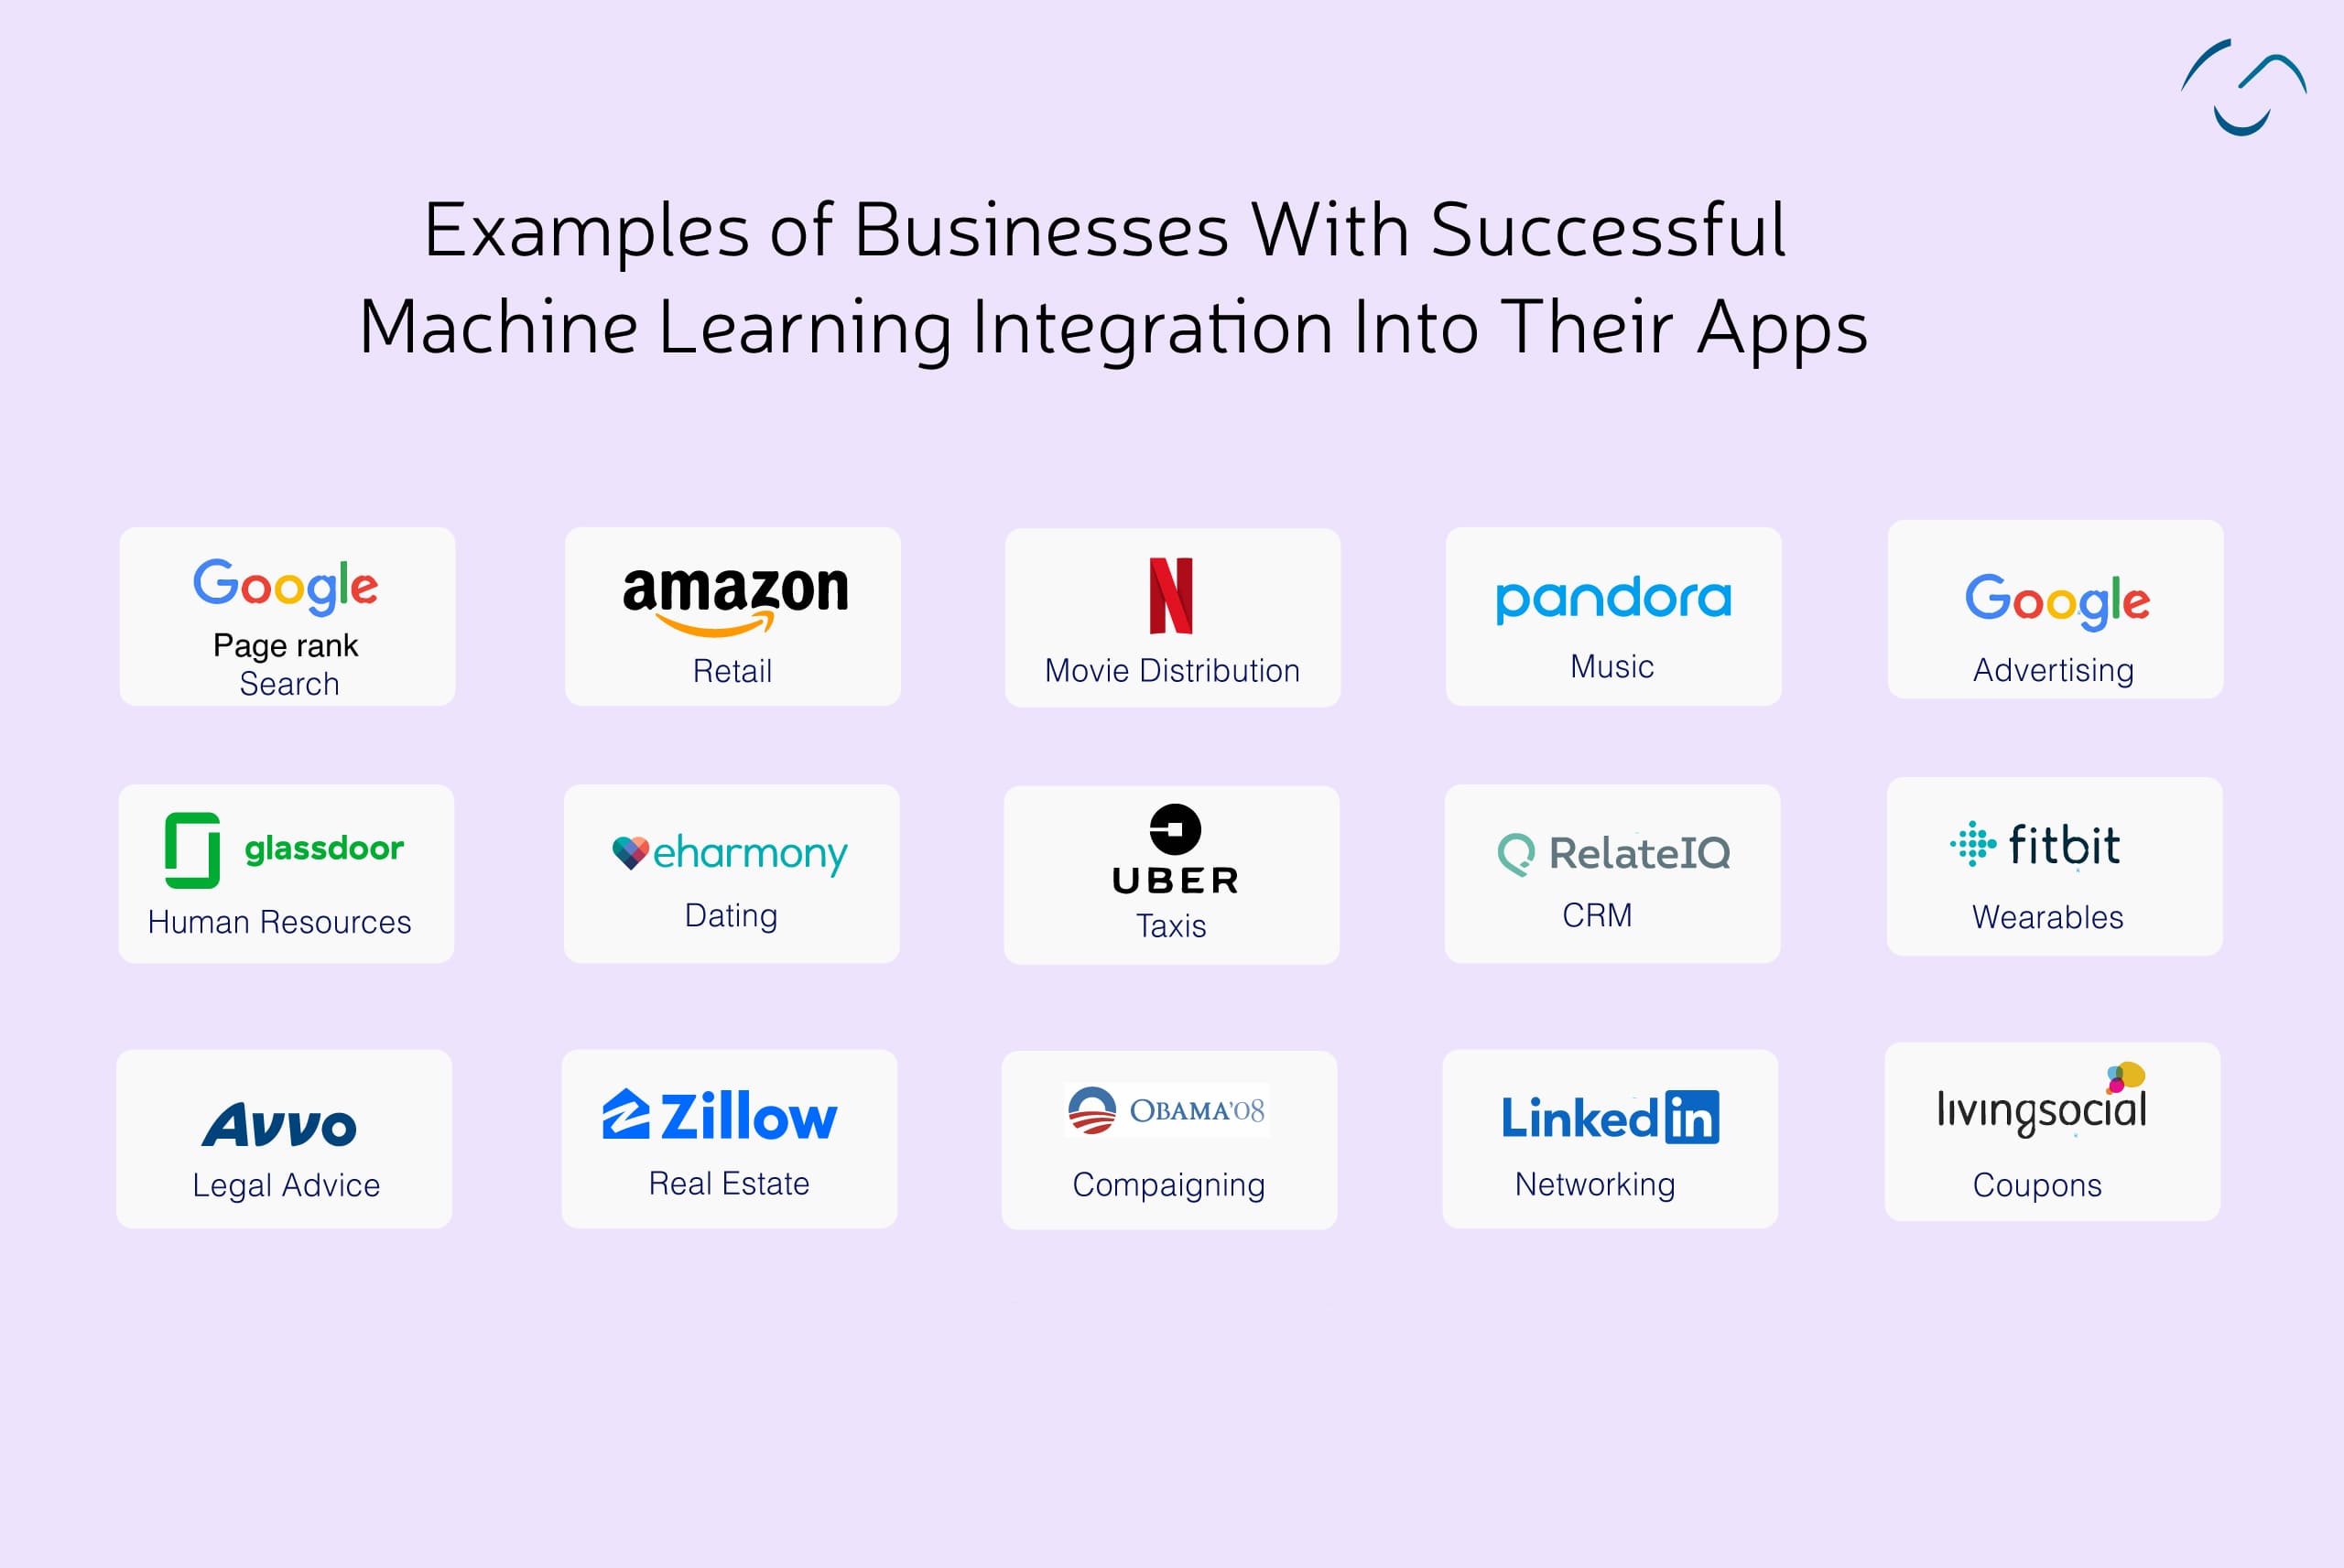 popular businesses using machine learning